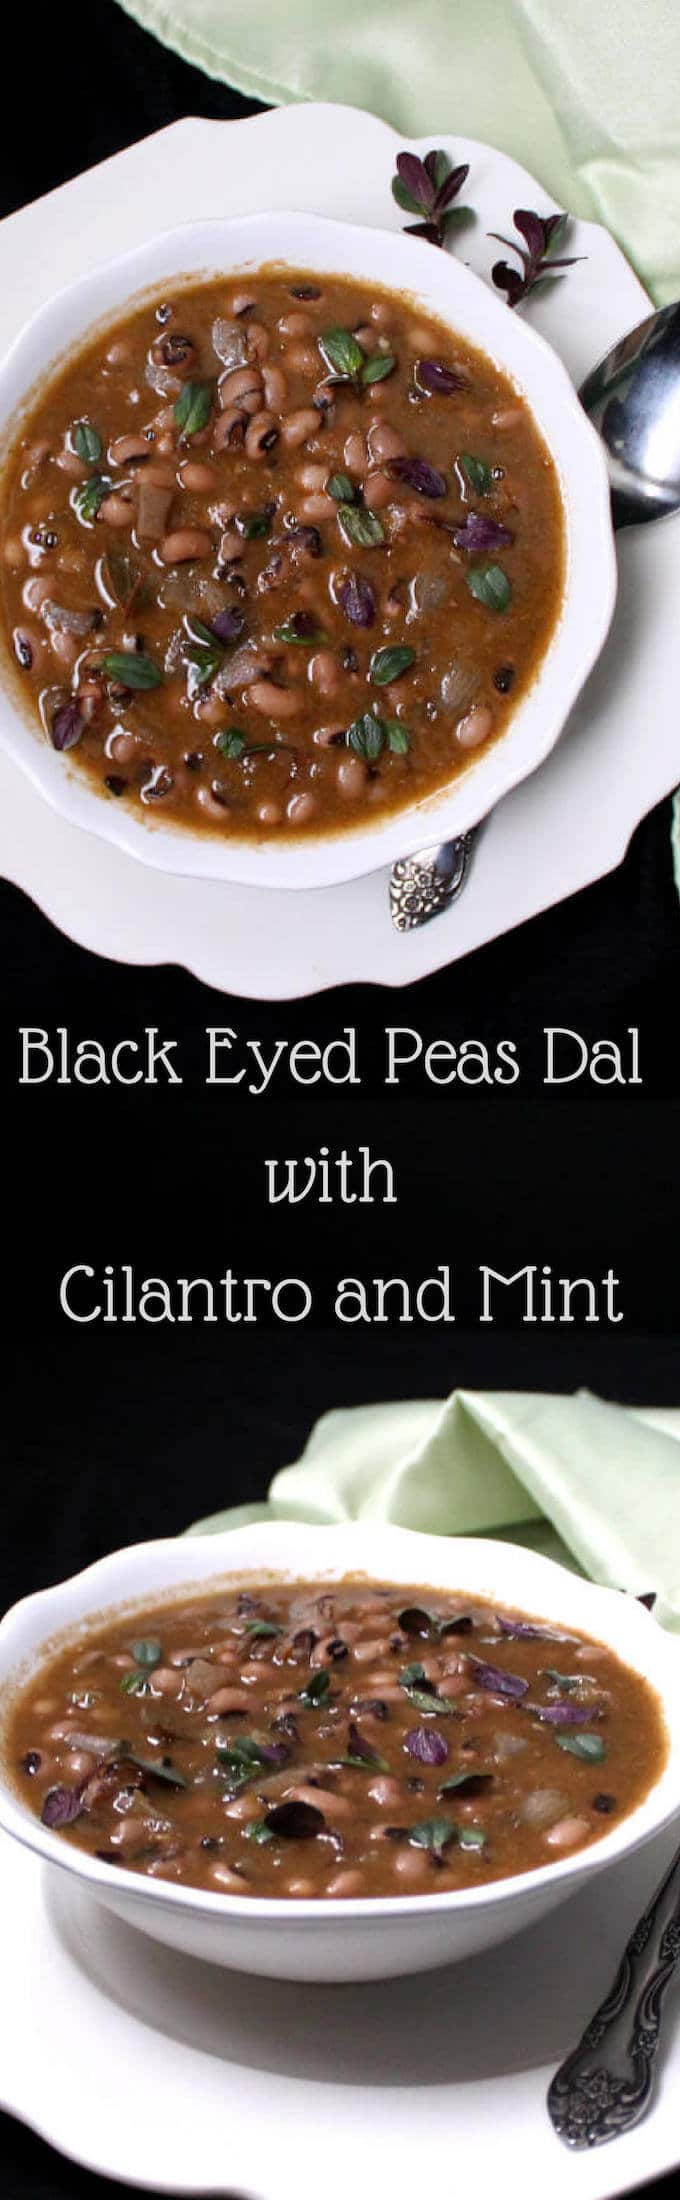 Images of black eyed peas dal with text inlay that says "black eyed peas dal with cilantro and mint"